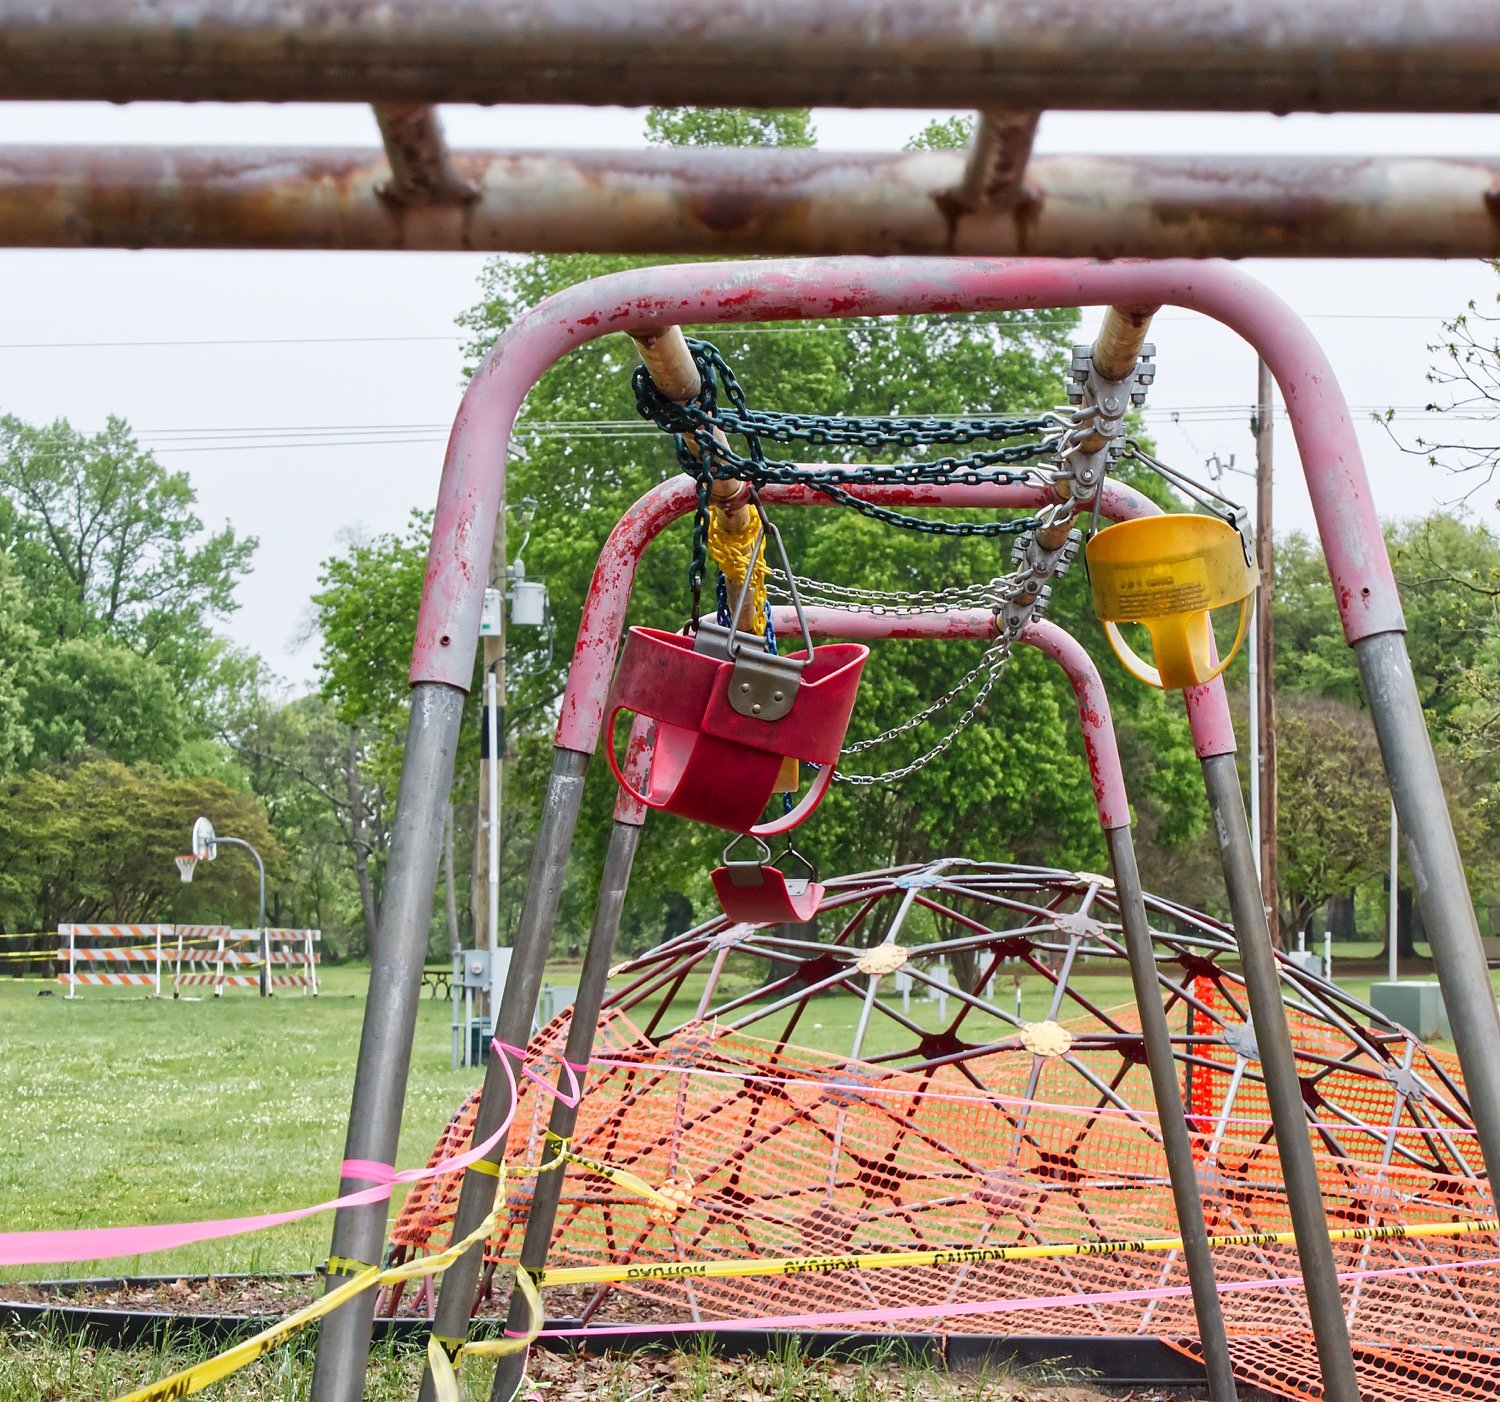 The city of Mineola jumped in late last week to close off all playground equipment in city parks, though the parks remain open for recreation as long as social distancing is followed.